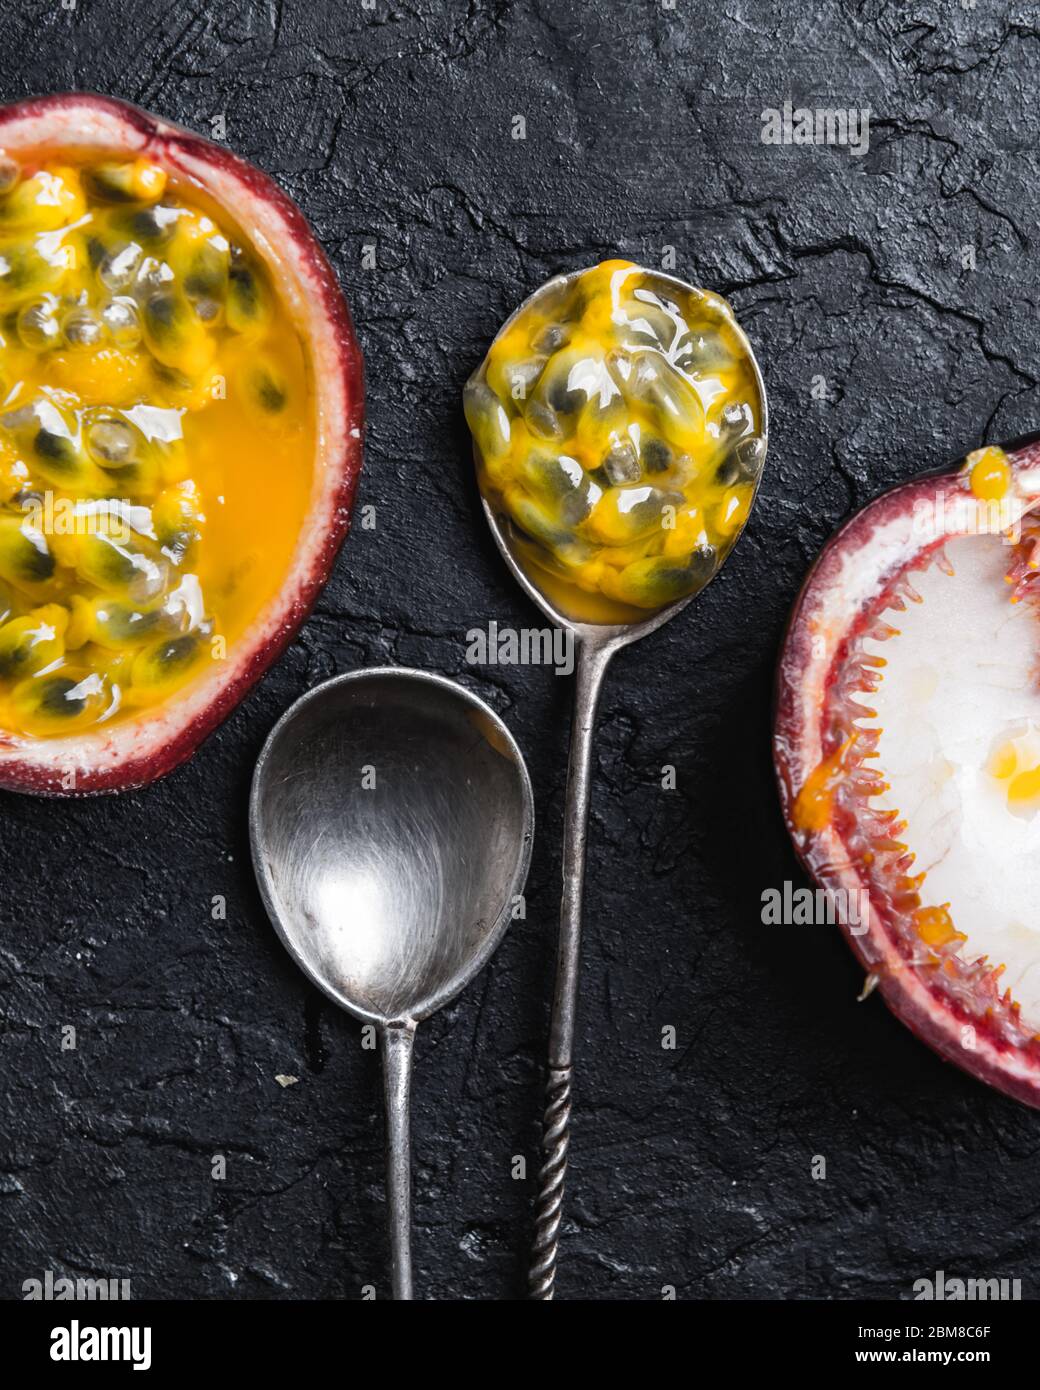 Slised passion fruit with silver spoons on black concrete background. Food photography Stock Photo